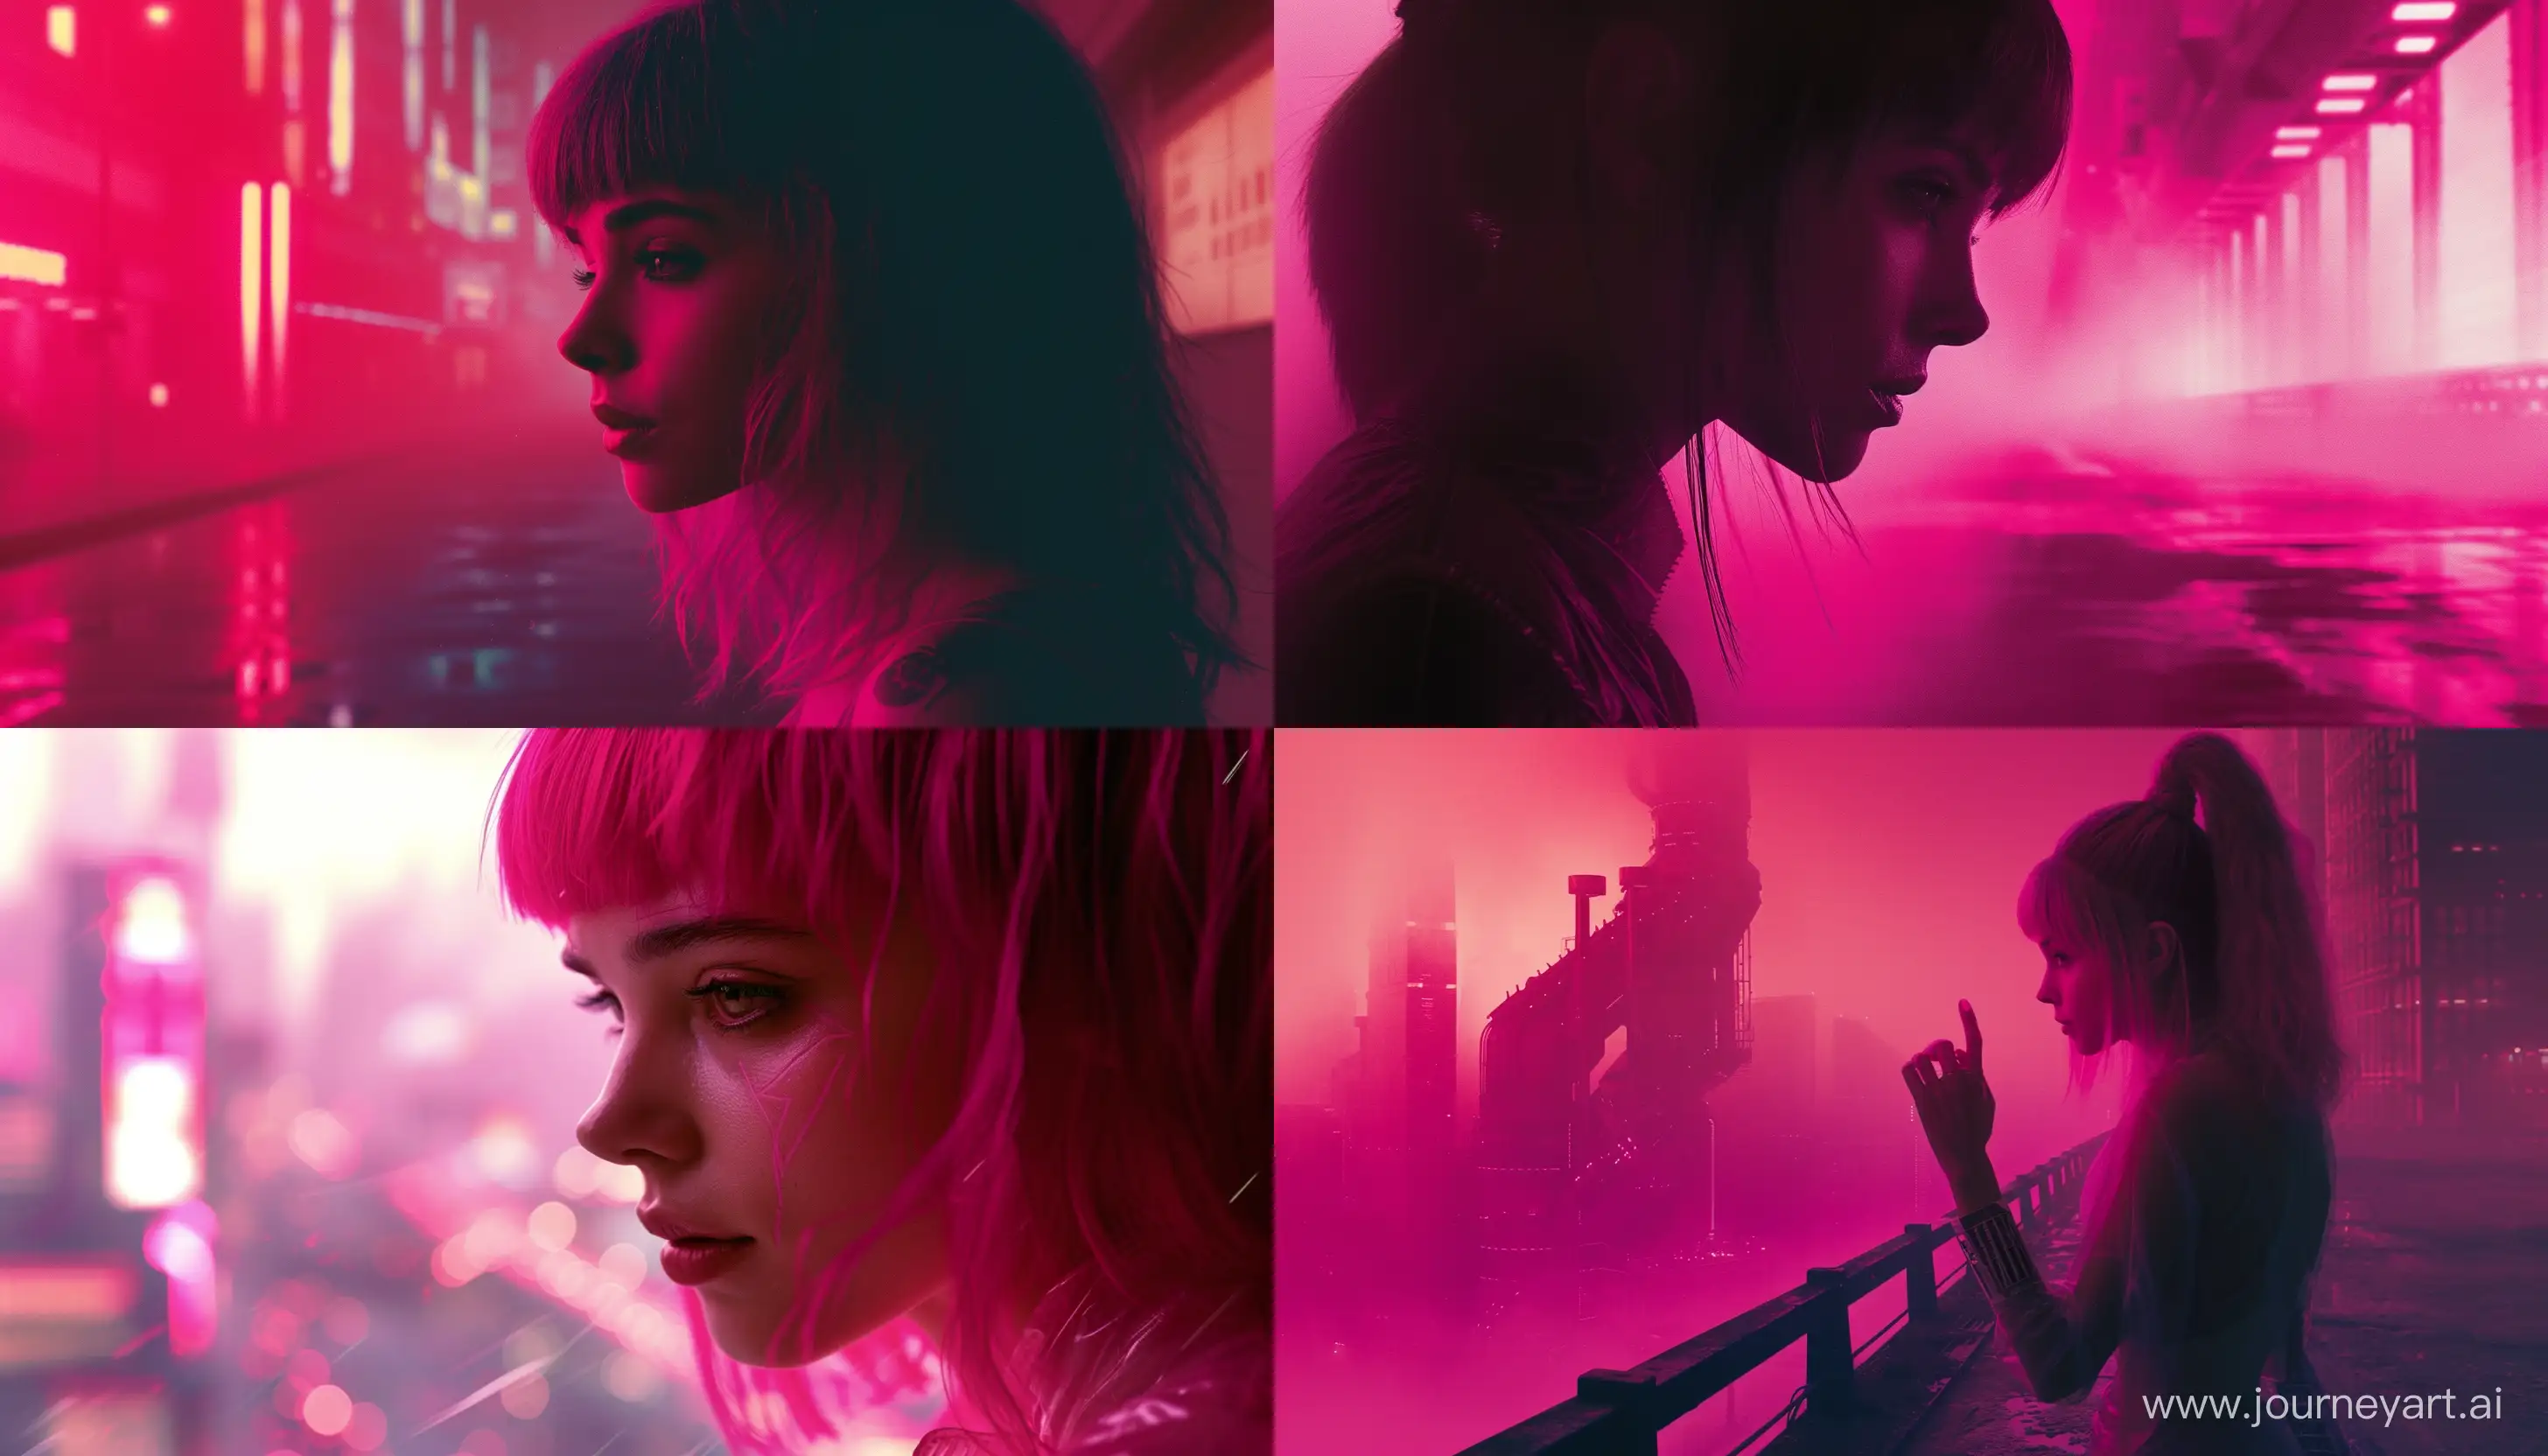 Futuristic-Cityscape-with-Pink-Aesthetic-and-Enigmatic-Woman-Blade-Runner-2049-Inspired-Art